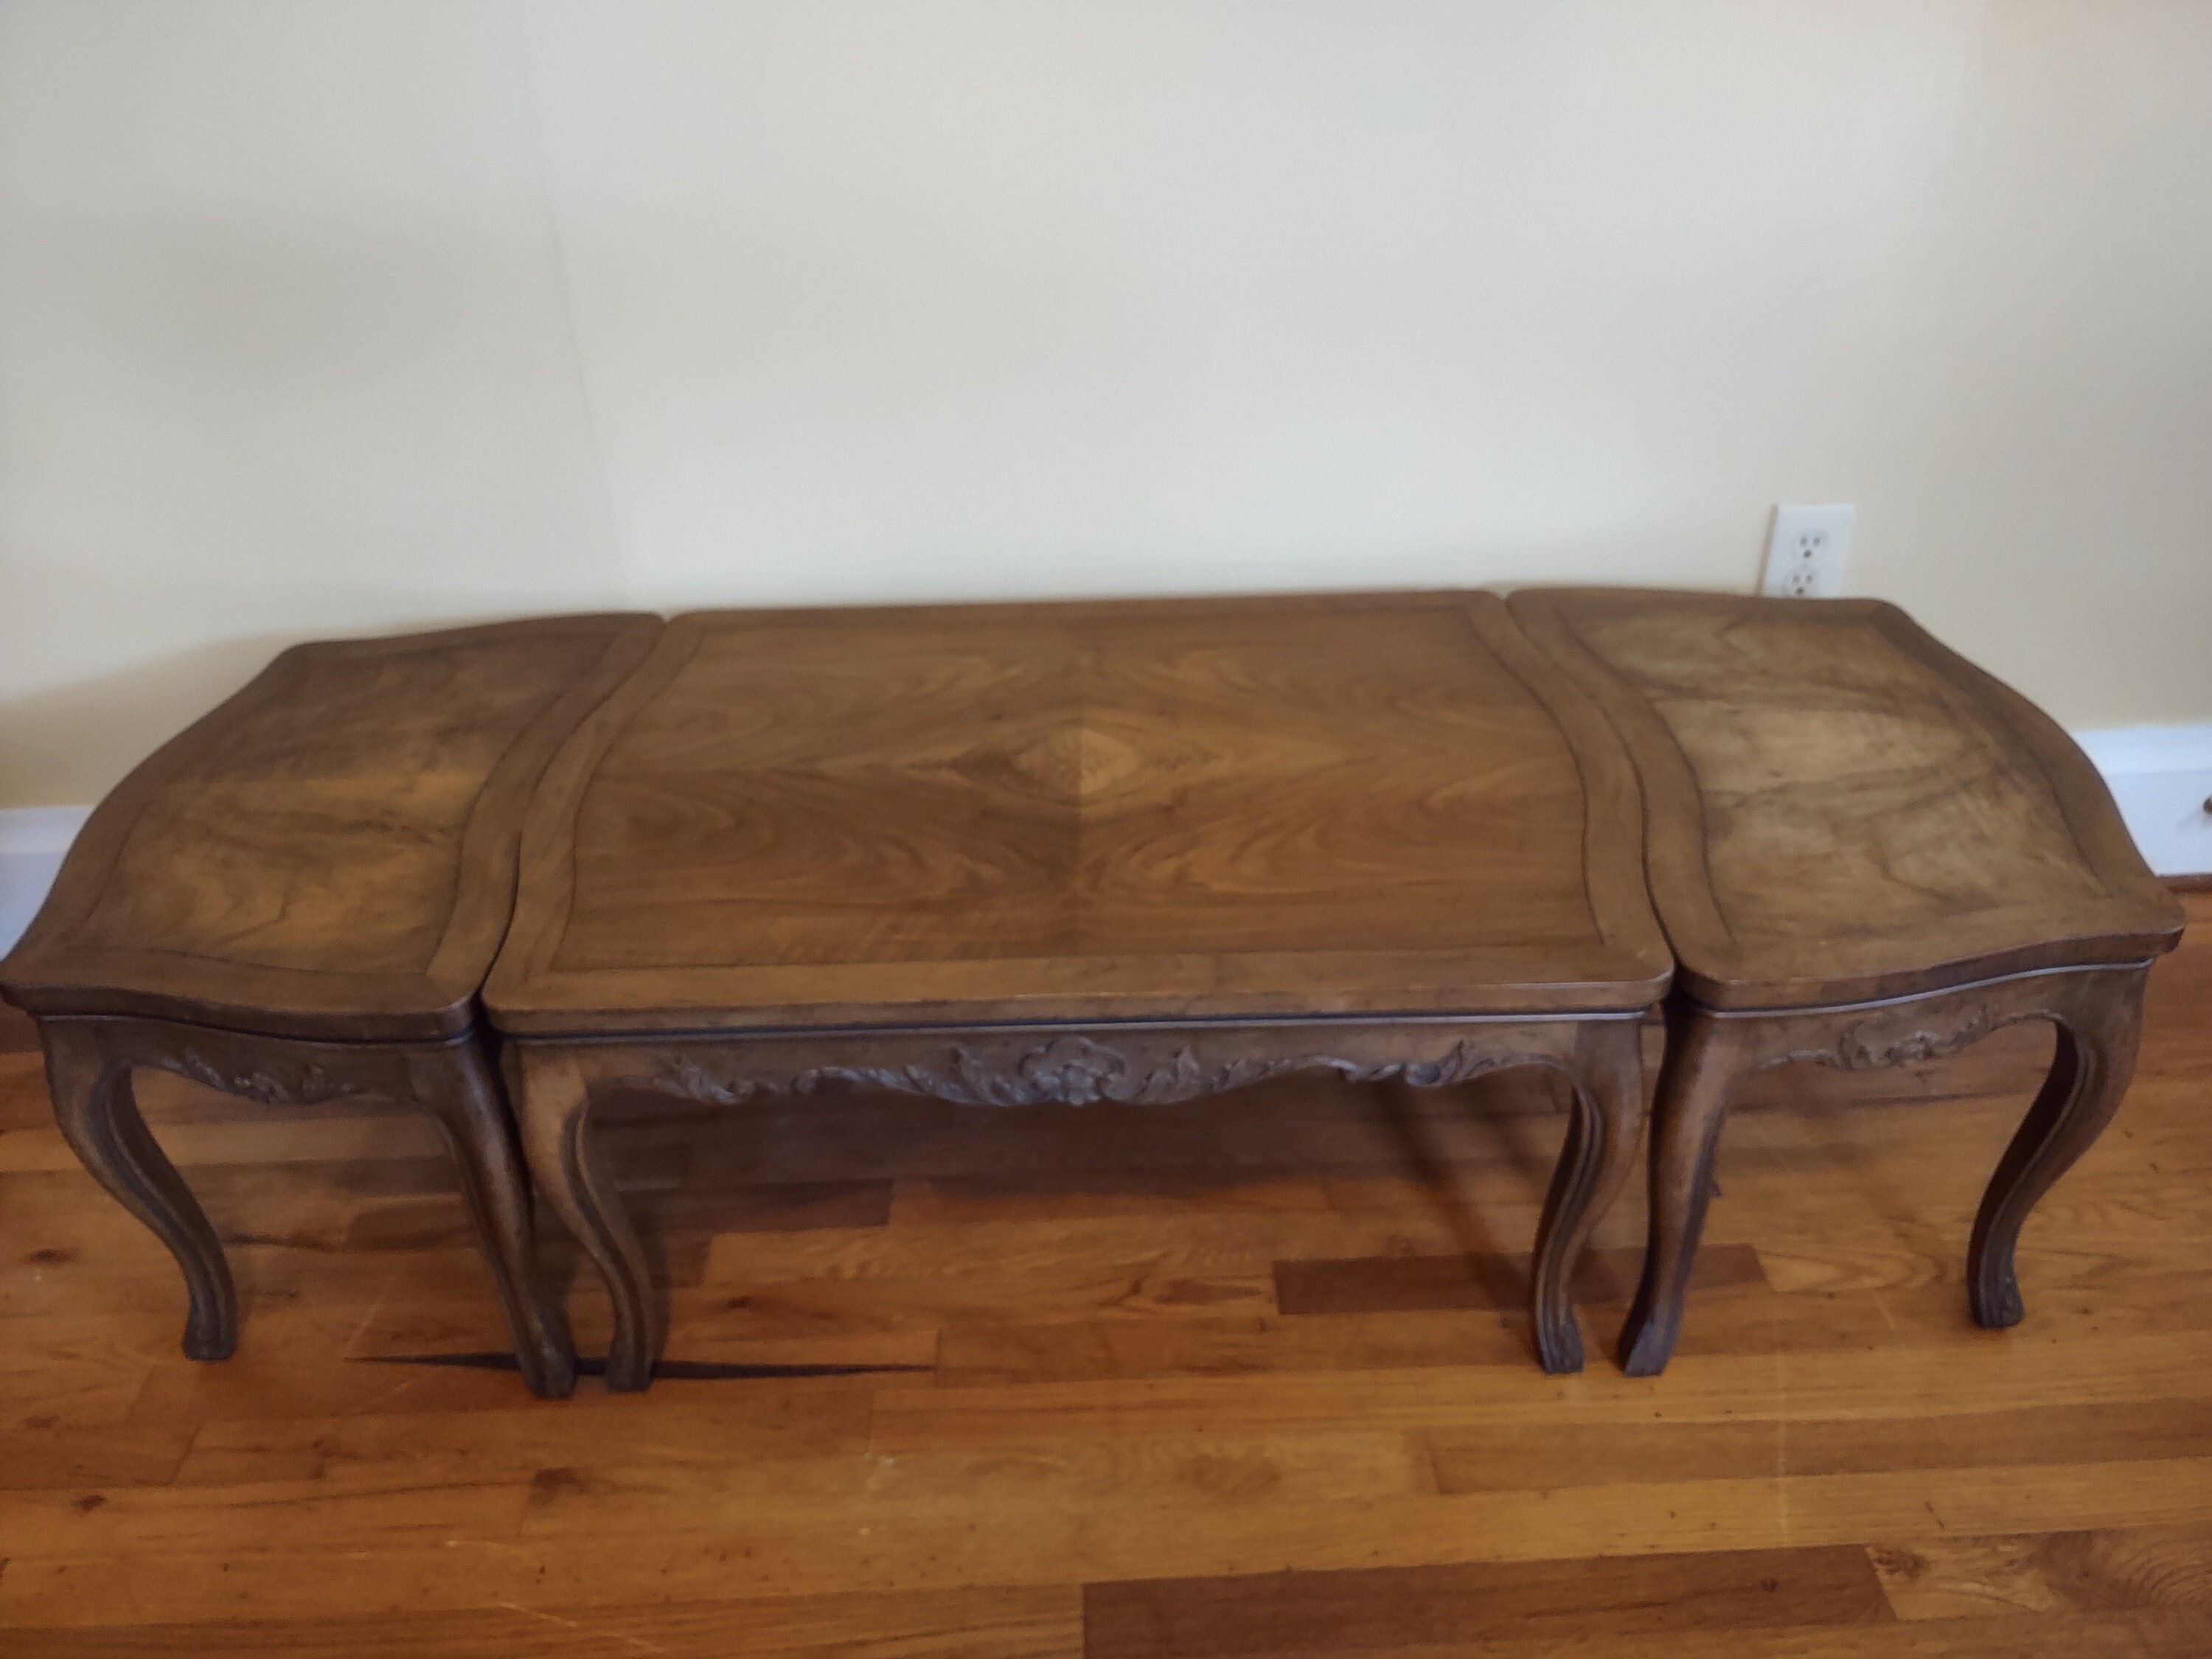 Rare Baker Furniture,(3) piece coffee table,burl wood tops,solid wood,carved design,French Provincial style,well made,versatile,vintagethumbnail